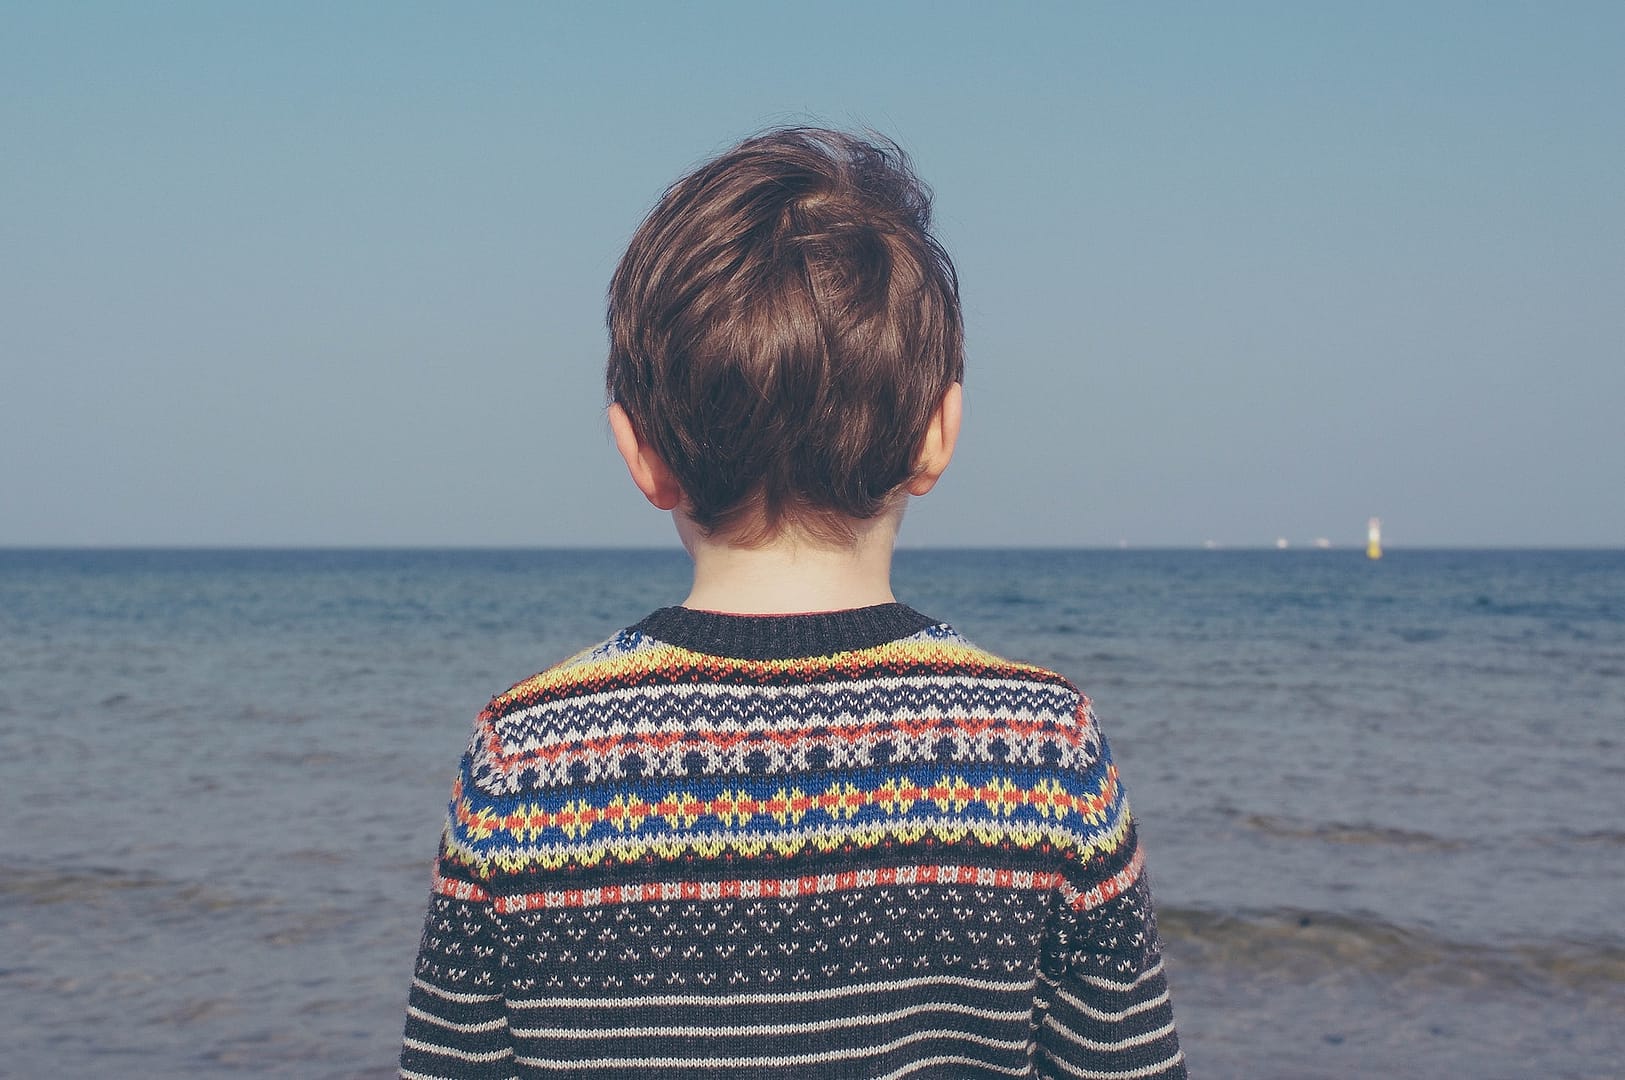 A child looking out to sea